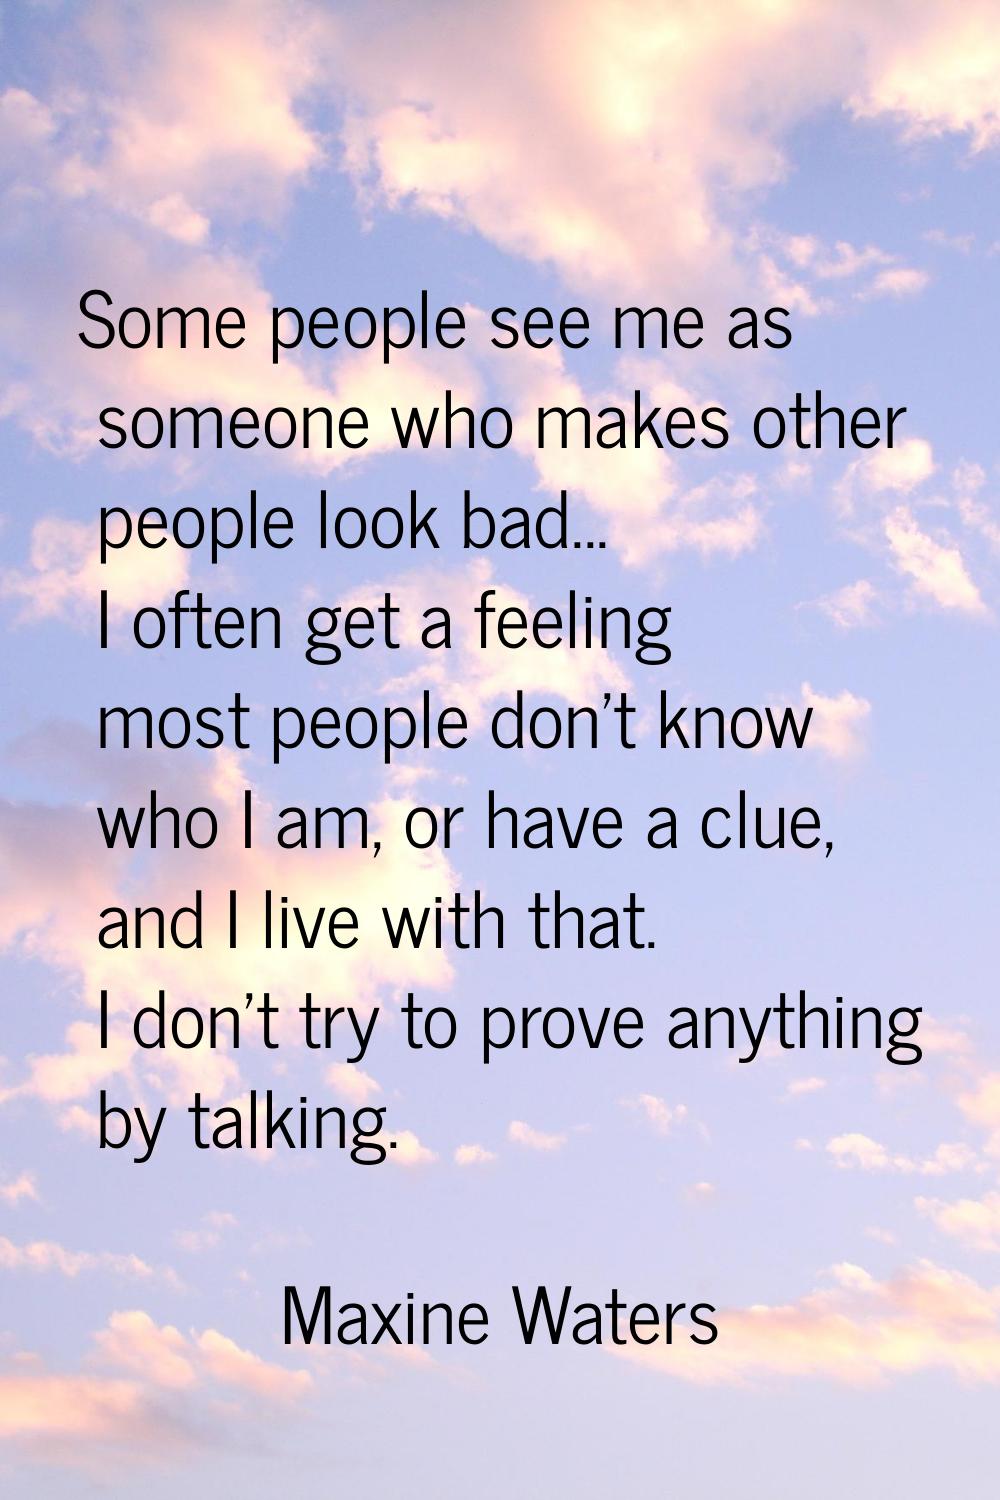 Some people see me as someone who makes other people look bad... I often get a feeling most people 